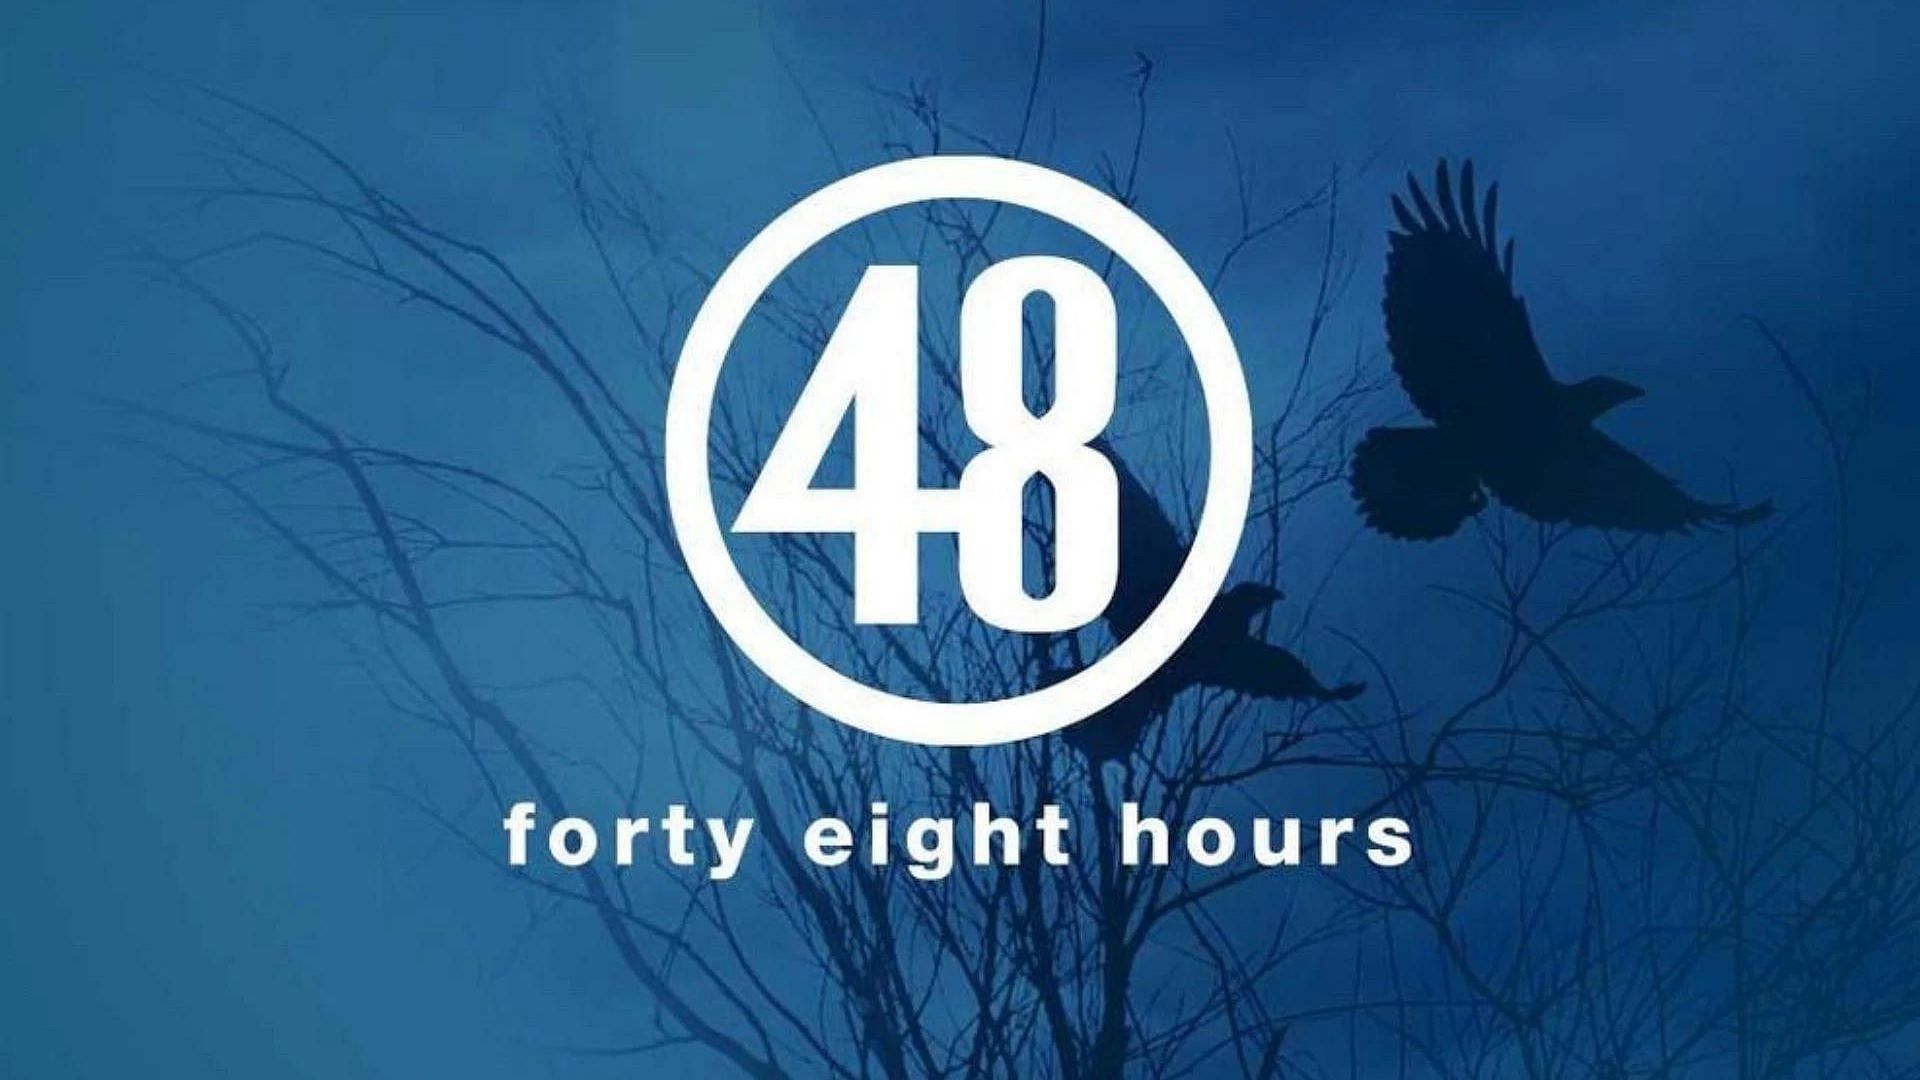 A promotional poster for 48 hours (Image Via CBS News)